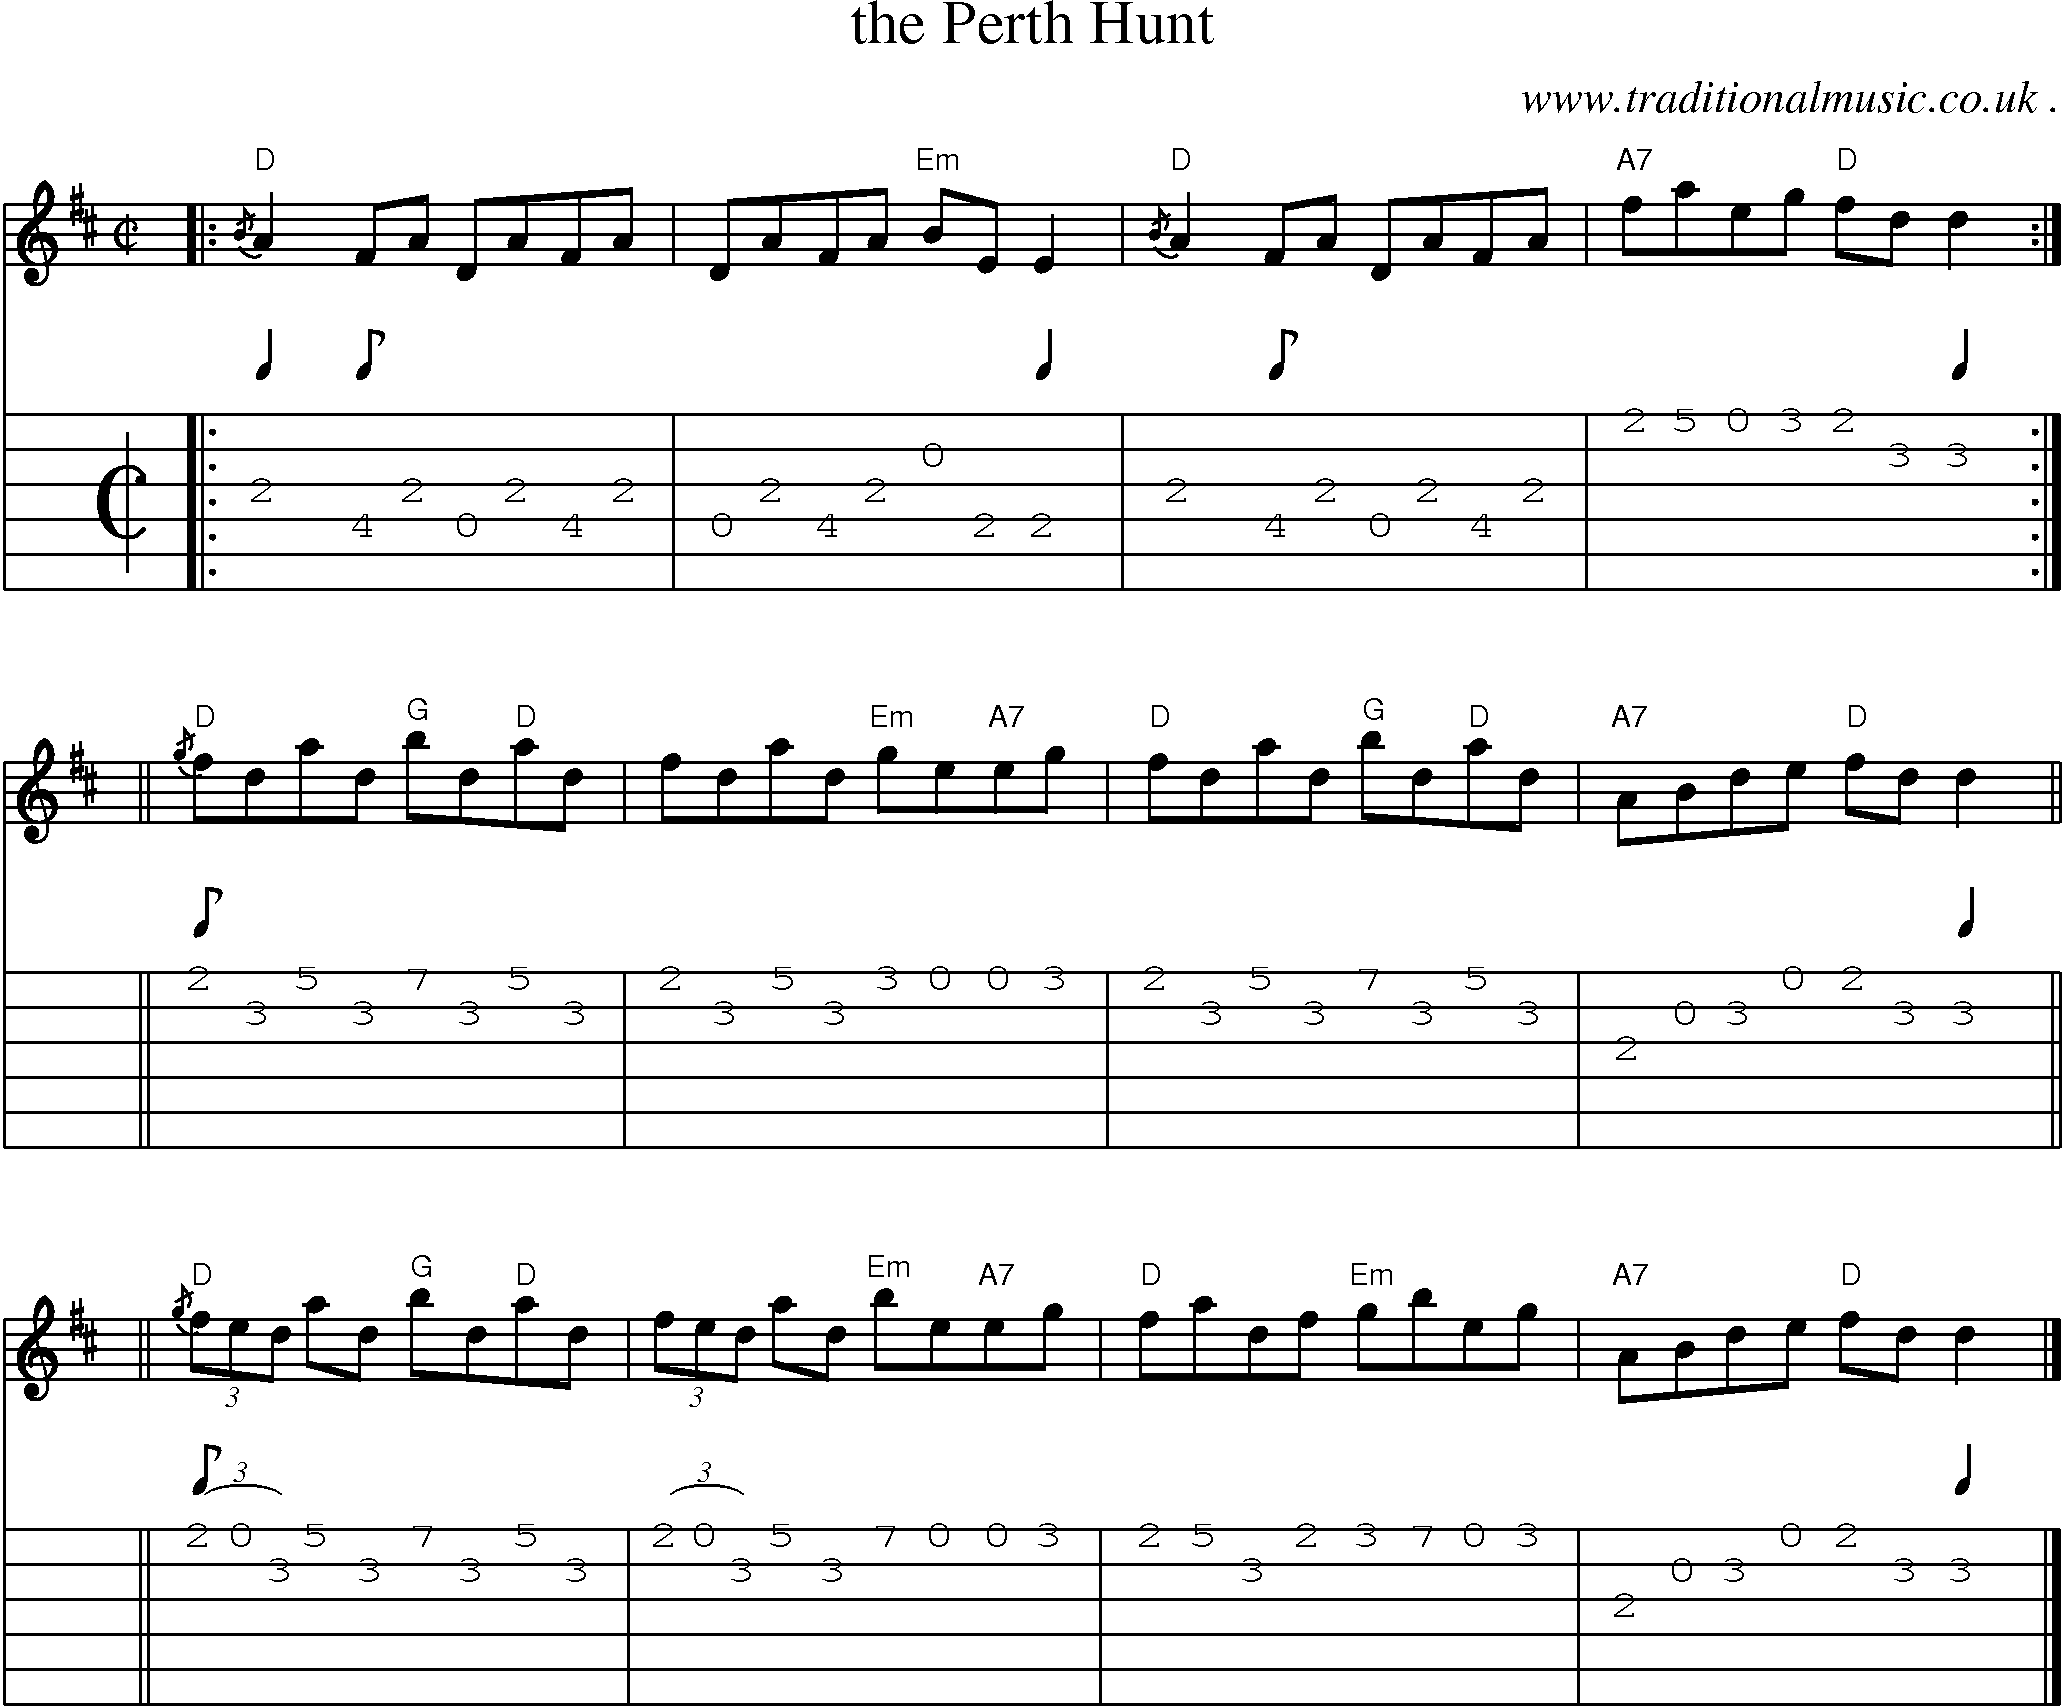 Sheet-music  score, Chords and Guitar Tabs for The Perth Hunt